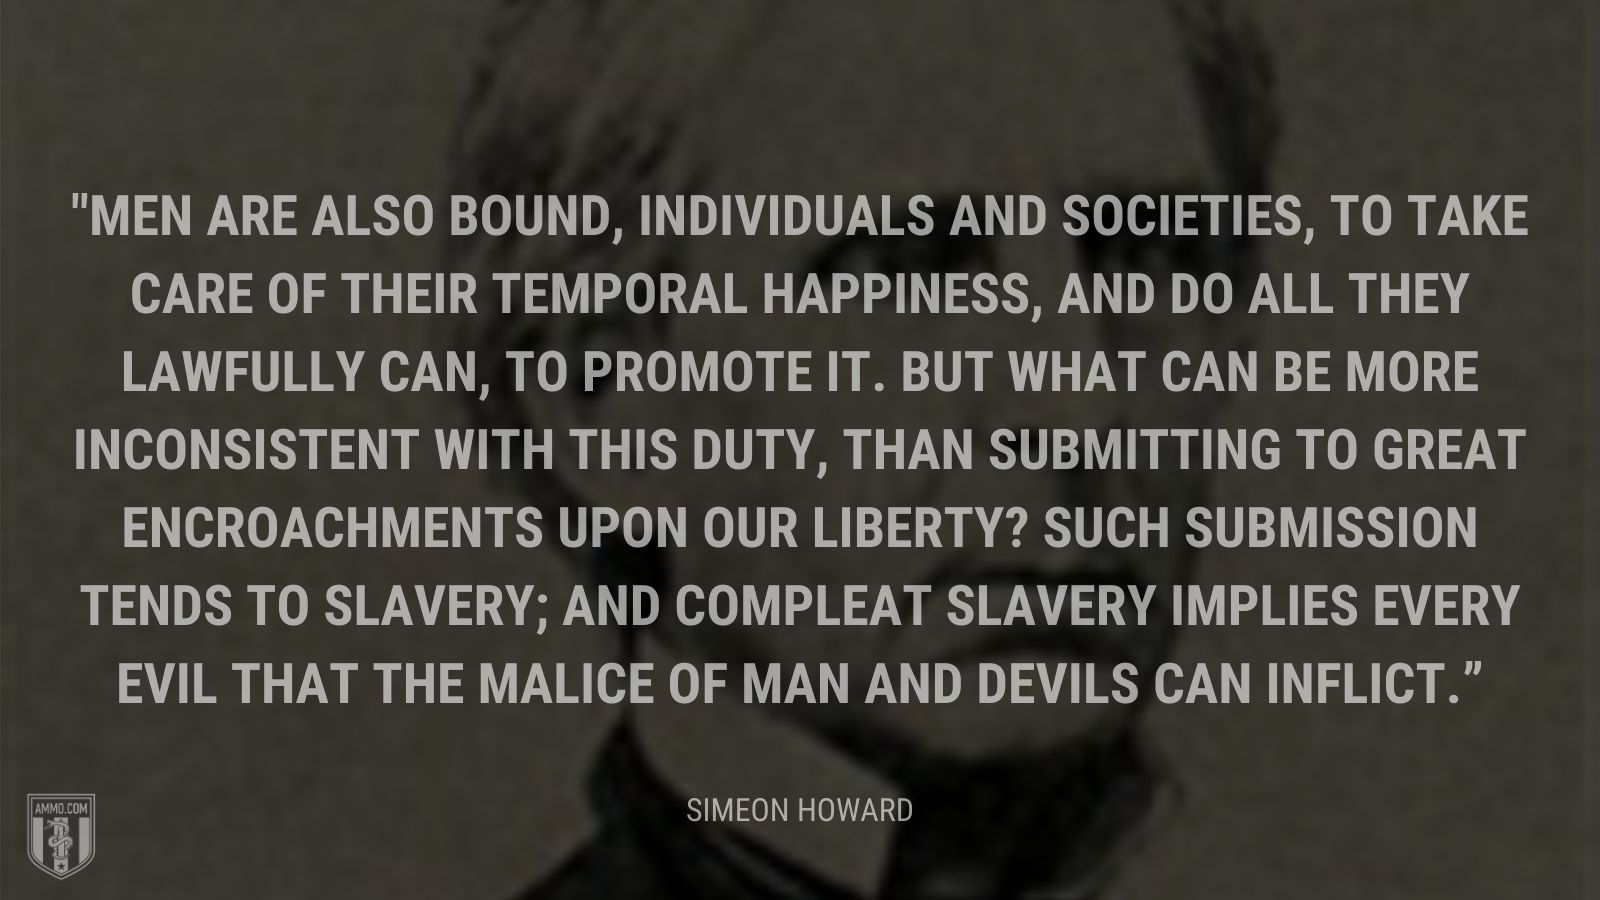 “Men are also bound, individuals and societies, to take care of their temporal happiness, and do all they lawfully can, to promote it. But what can be more inconsistent with this duty, than submitting to great encroachments upon our liberty? Such submission tends to slavery; and compleat slavery implies every evil that the malice of man and devils can inflict.” - Simeon Howard